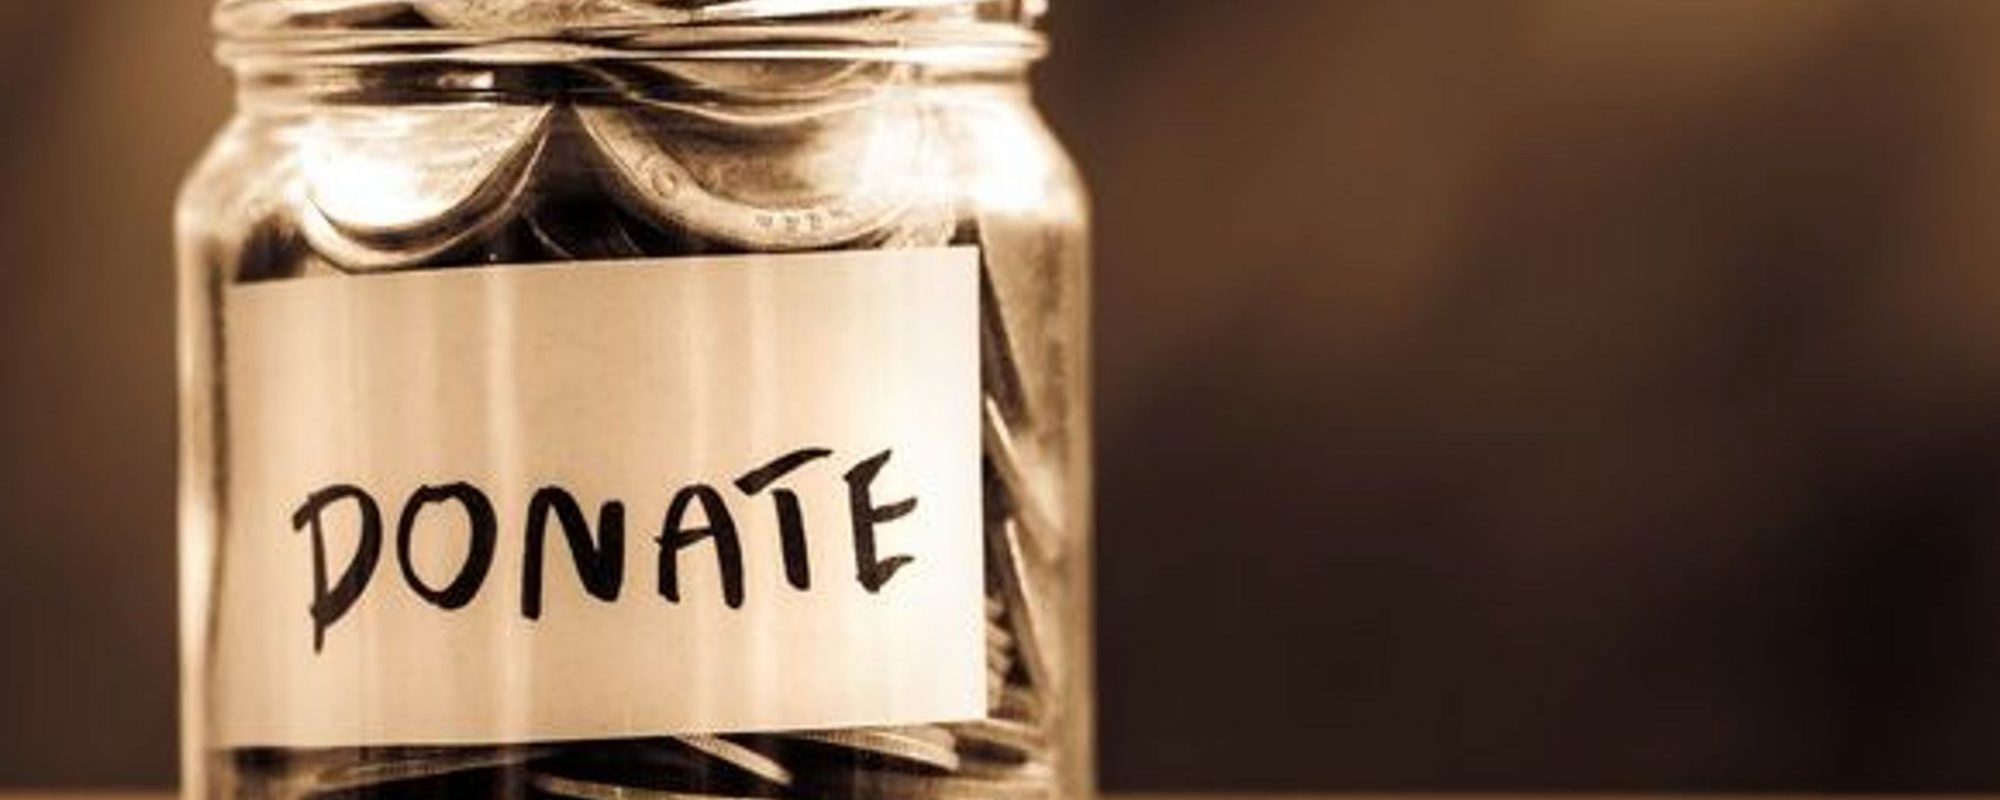 glass-jar-full-of-cois-with-donate-written-on-it-charity-donation-philanthropy_large-2000x1050